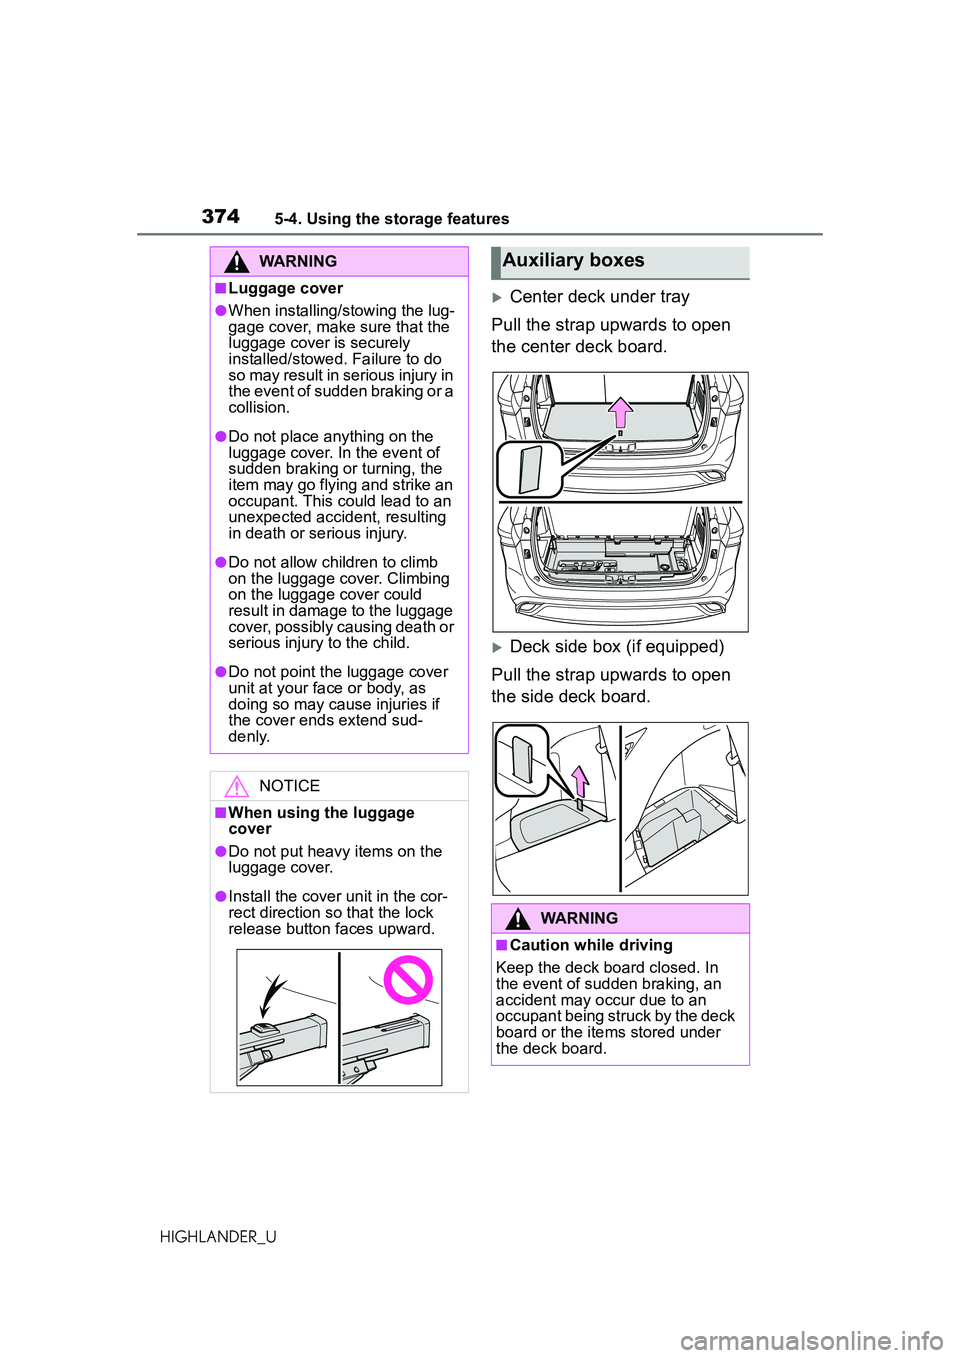 TOYOTA HIGHLANDER 2021  Owners Manual (in English) 3745-4. Using the storage features
HIGHLANDER_U
Center deck under tray
Pull the strap upwards to open 
the center deck board.
Deck side box (if equipped)
Pull the strap upwards to open 
the side